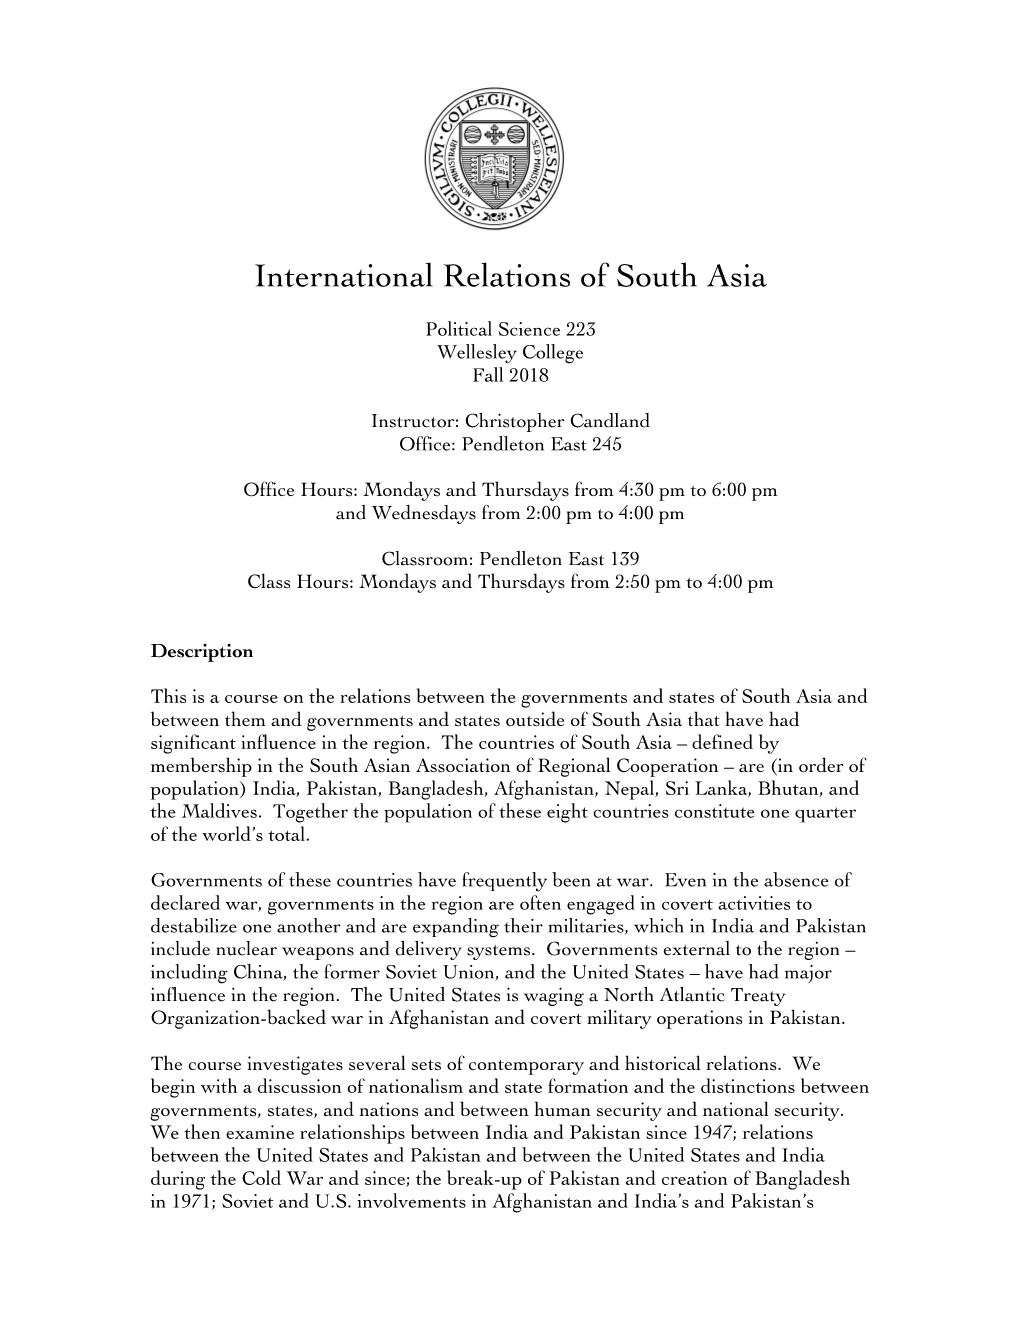 POL3 223 International Relations of South Asia (Fall 2018)